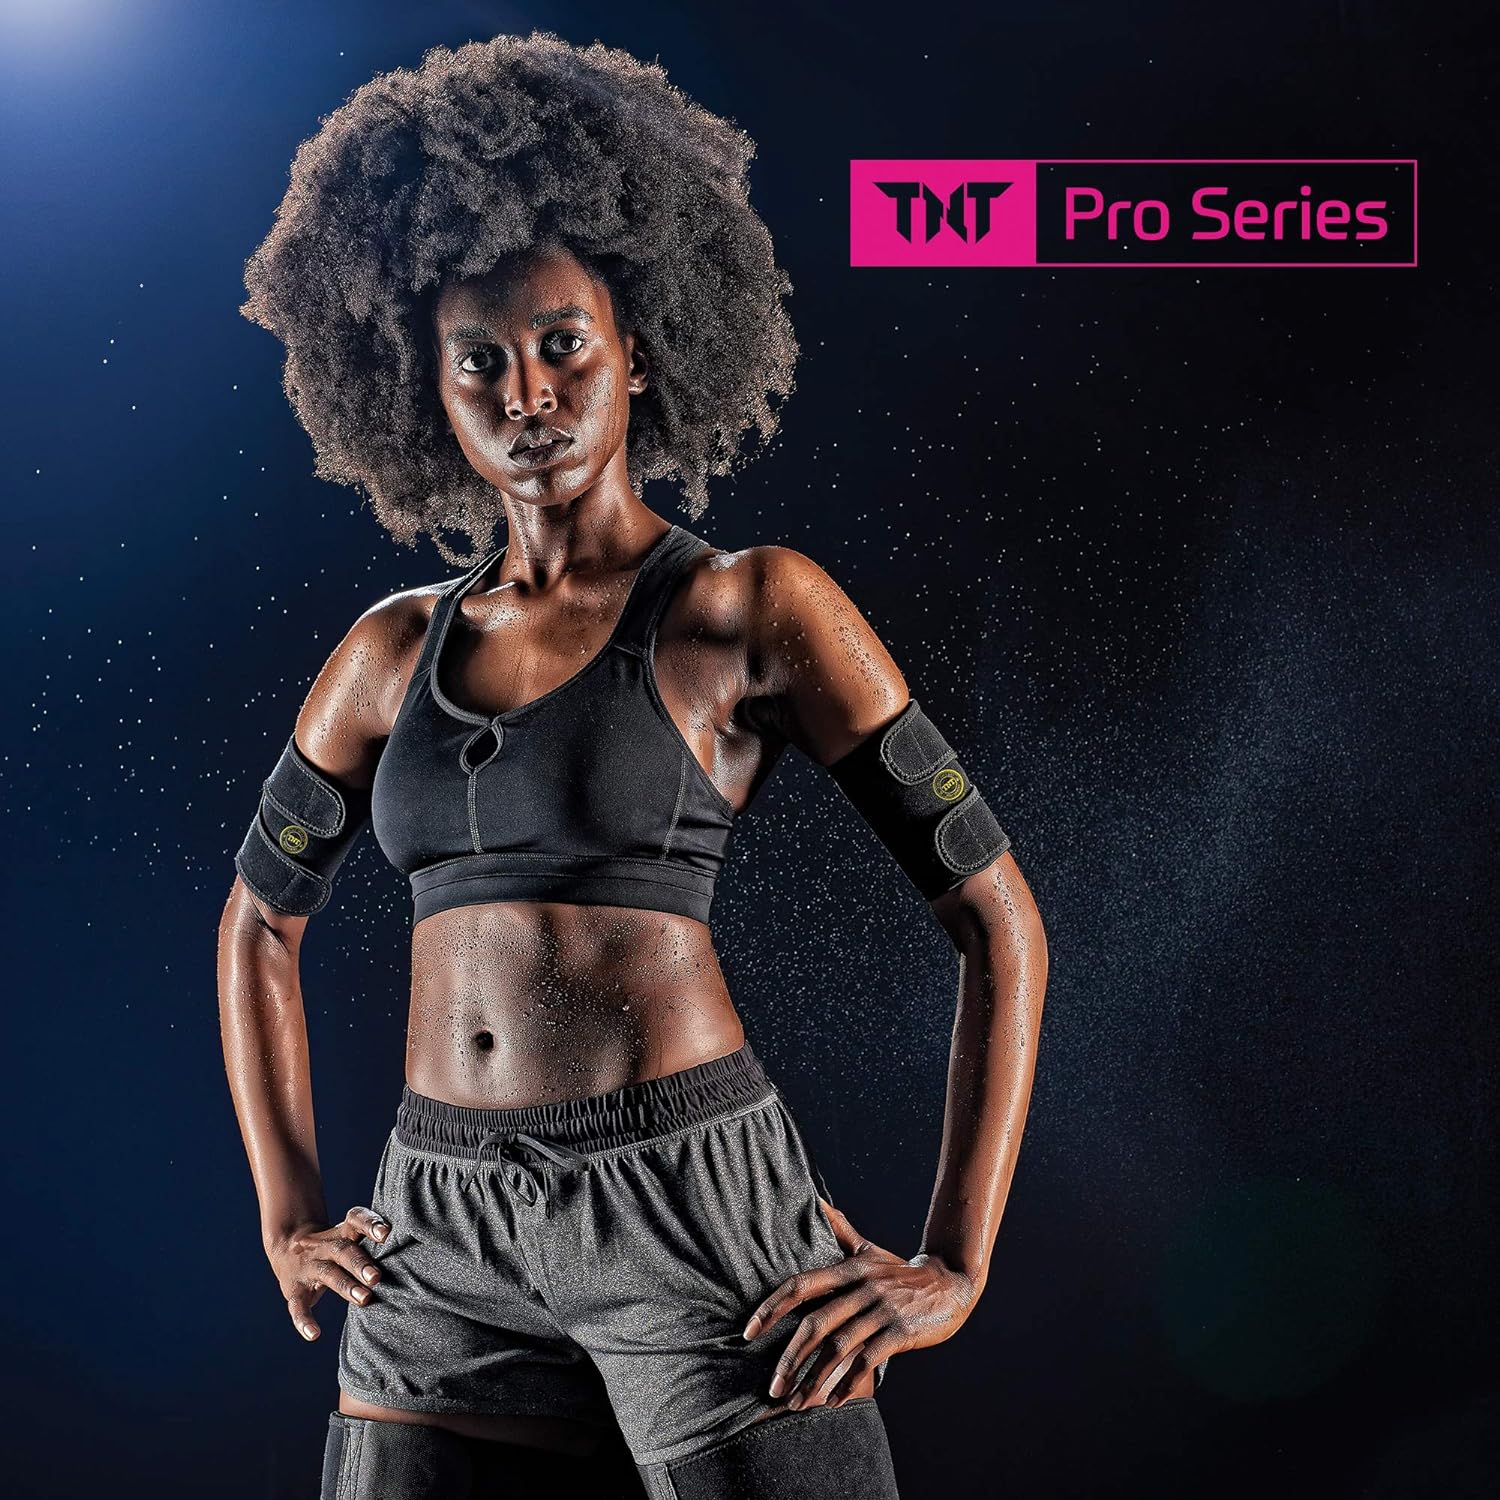 TNT Pro Series Arm Trimmers, Thigh Trimmer for Women/Men, Arm Slimmers Thigh Sweat Bands for Women, Arm and Thigh Trimmers